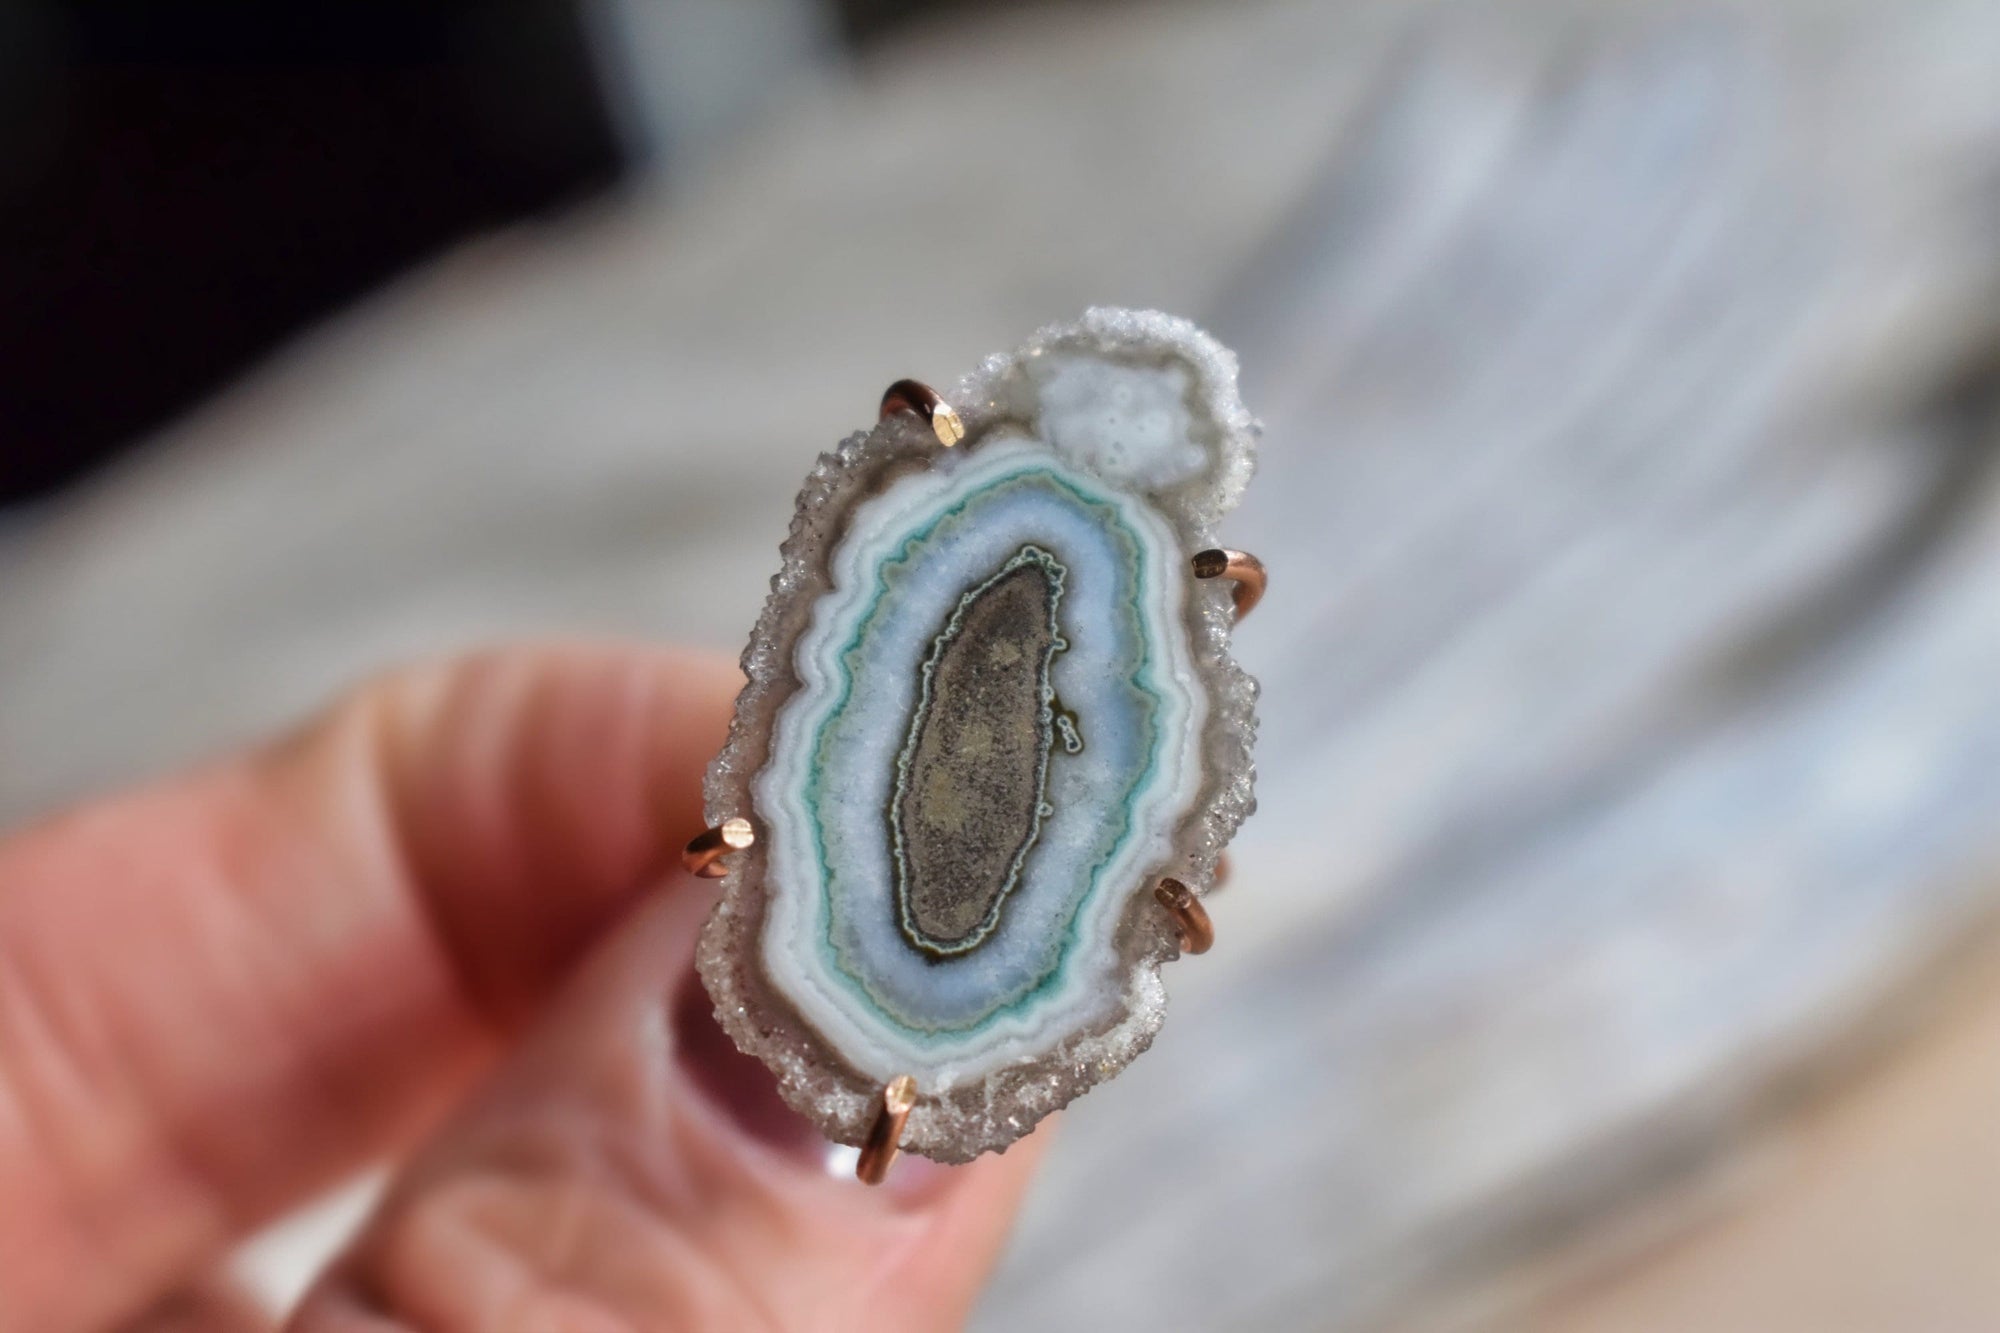 One of a Kind Ring, Stalactite Crystal Slice in Blue White and Grey, Set into 4K Rose Gold Fill Band in a Size 6, Titled: Mother Earth II